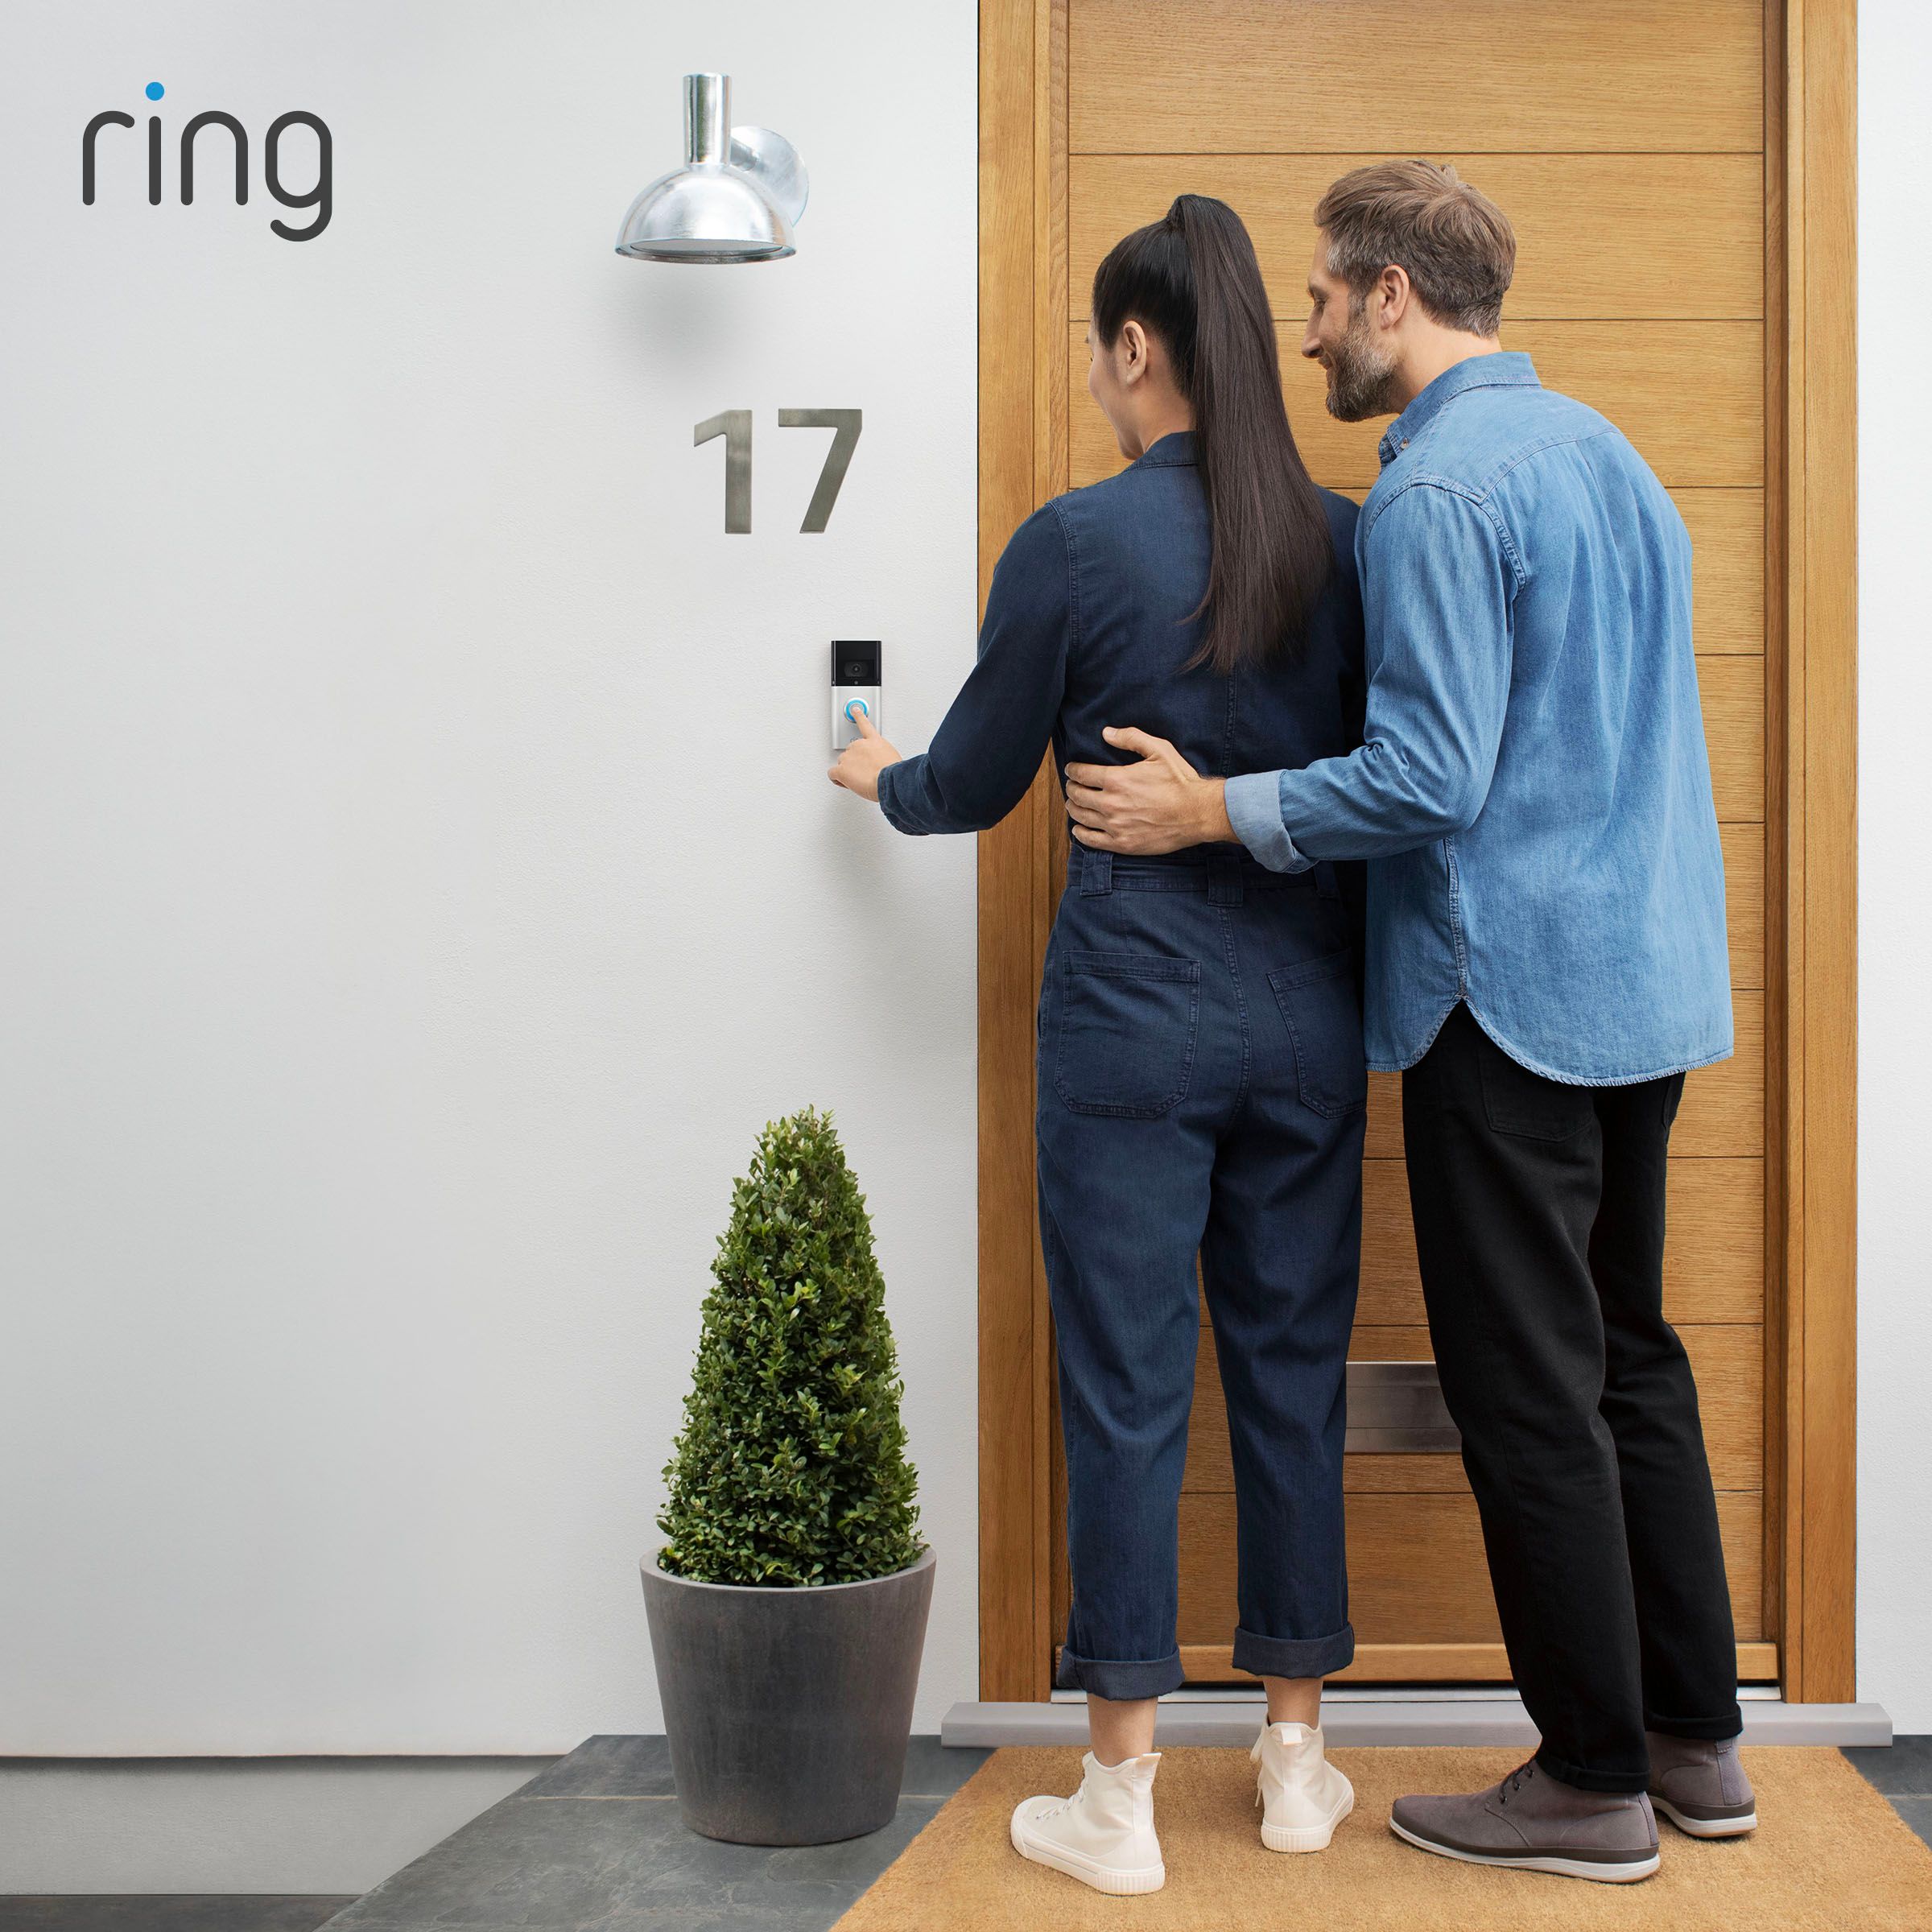 Create your Ring of security